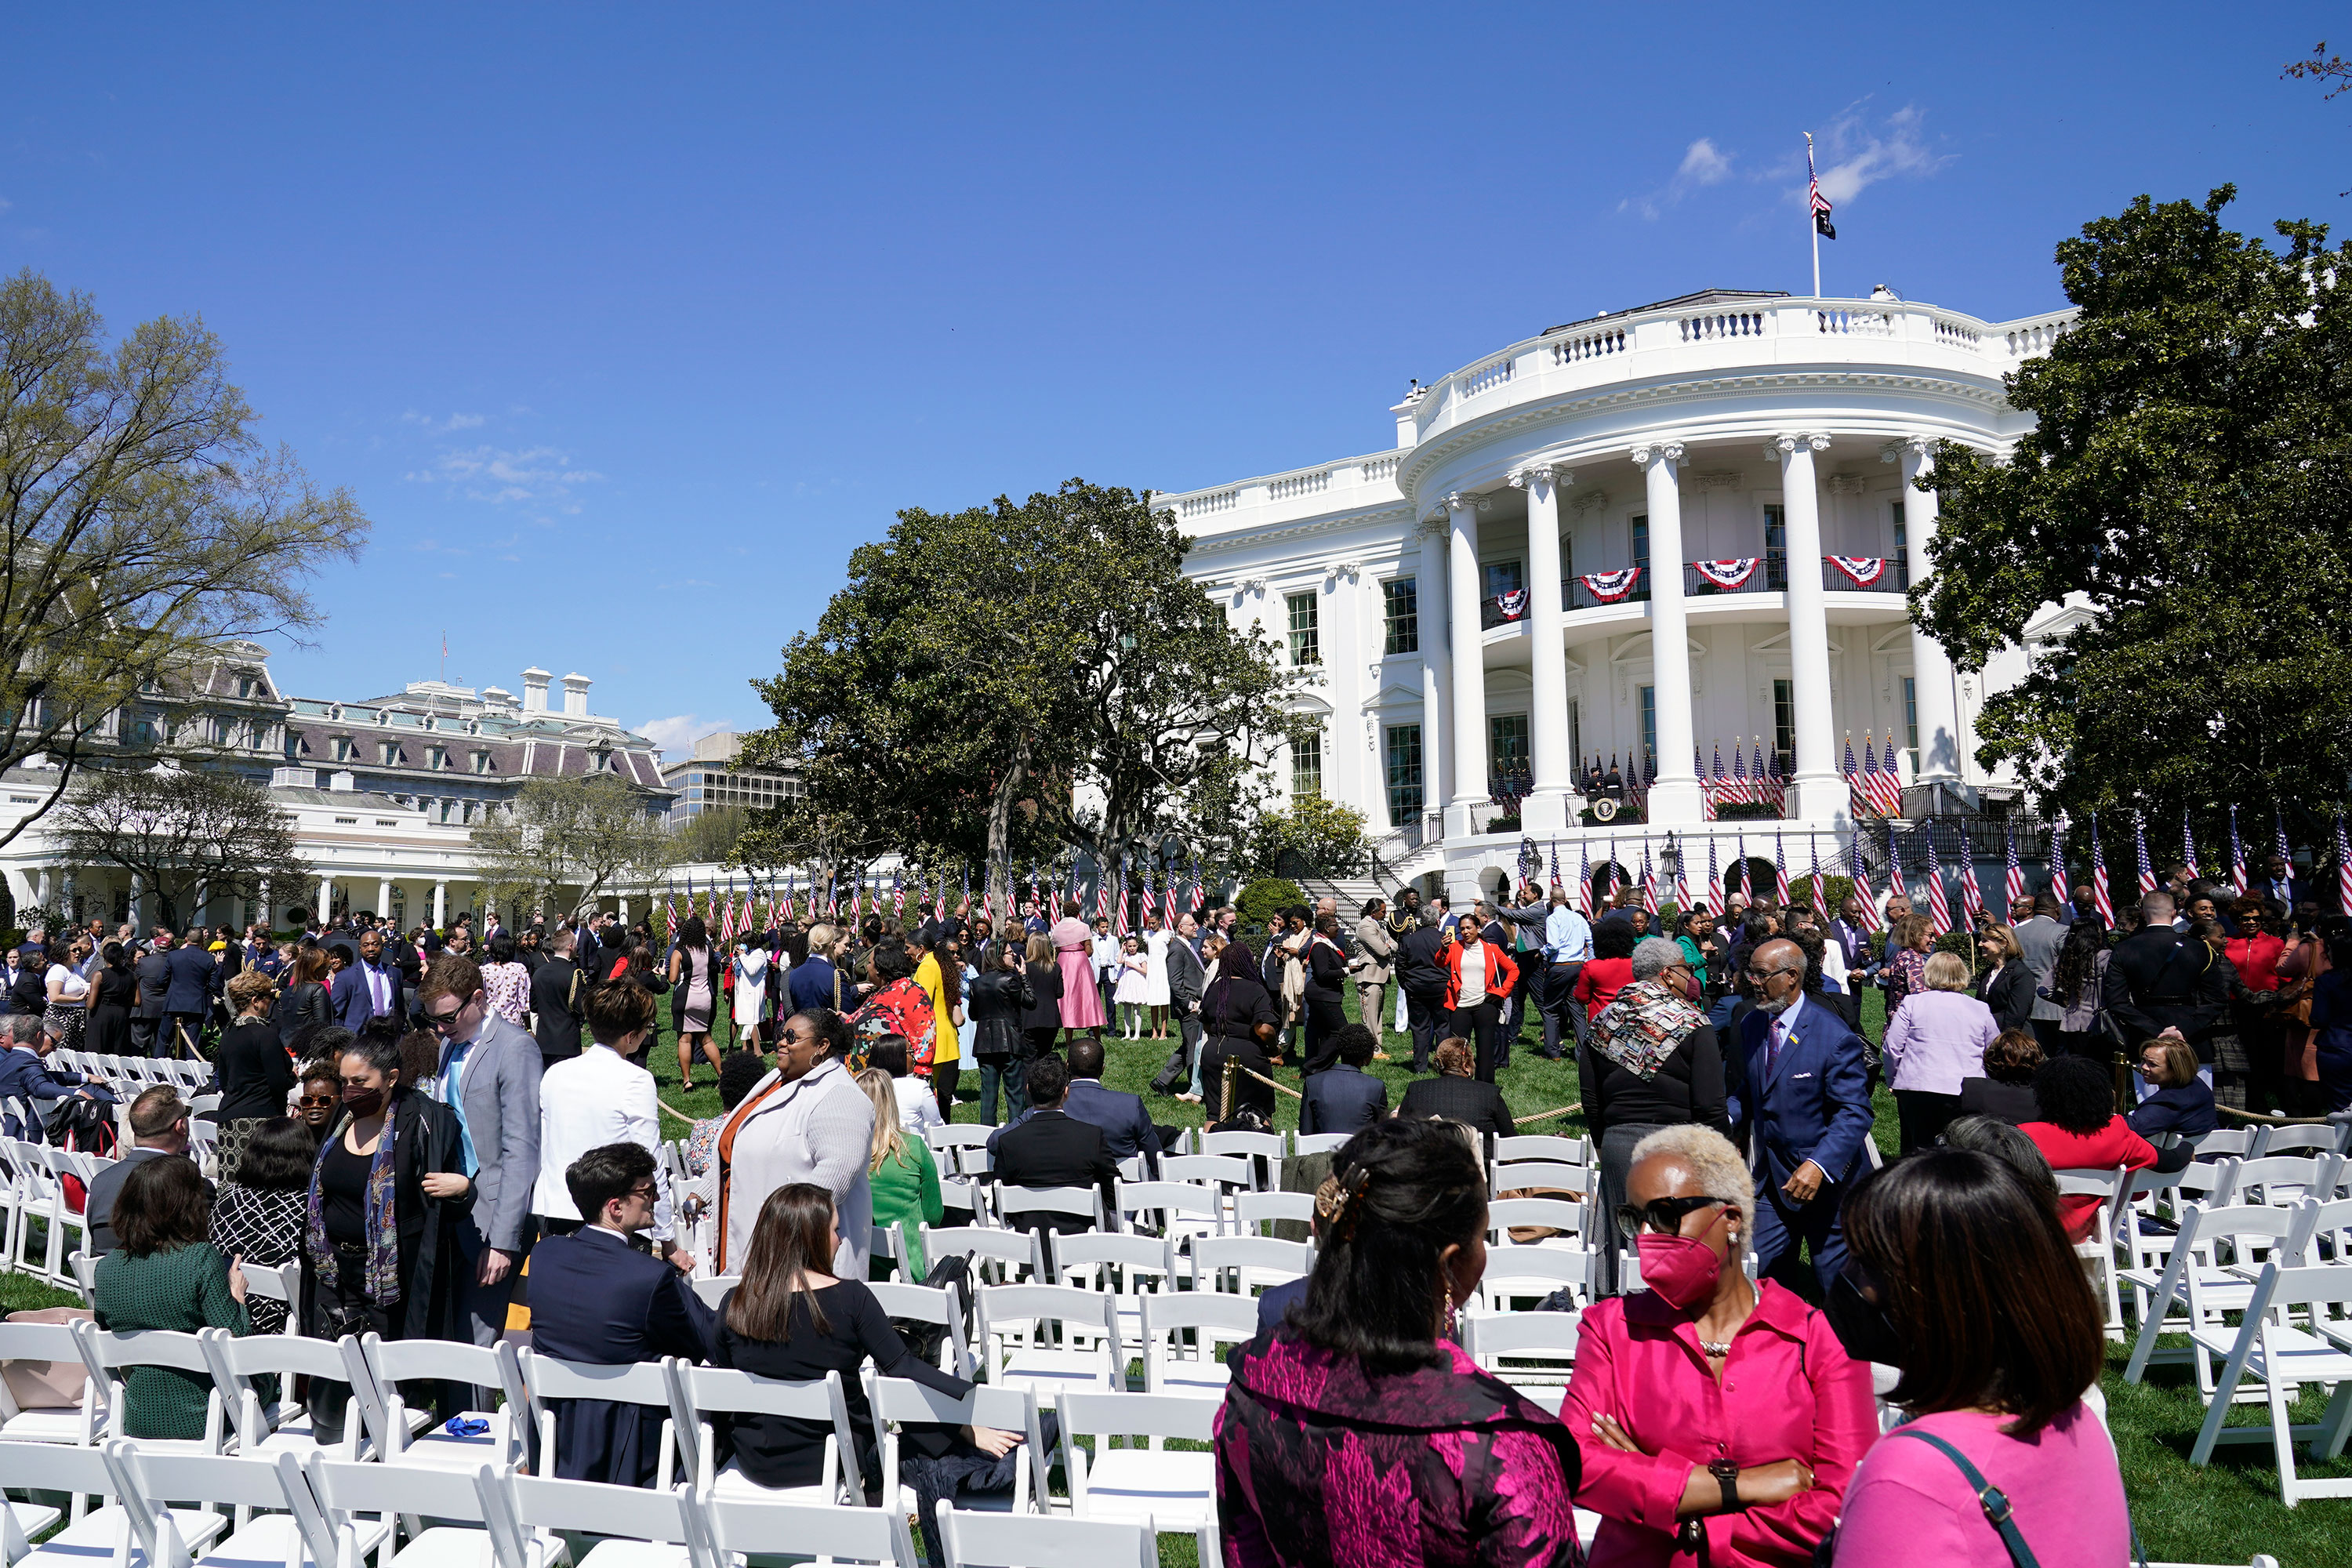 Guests begin to gather on the South Lawn of the White House where President Joe Biden, accompanied by Vice President Kamala Harris and Judge Ketanji Brown Jackson, will speak and celebrate the confirmation of Jackson as the first Black woman to reach the Supreme Court, Friday, April 8, 2022 in Washington. 